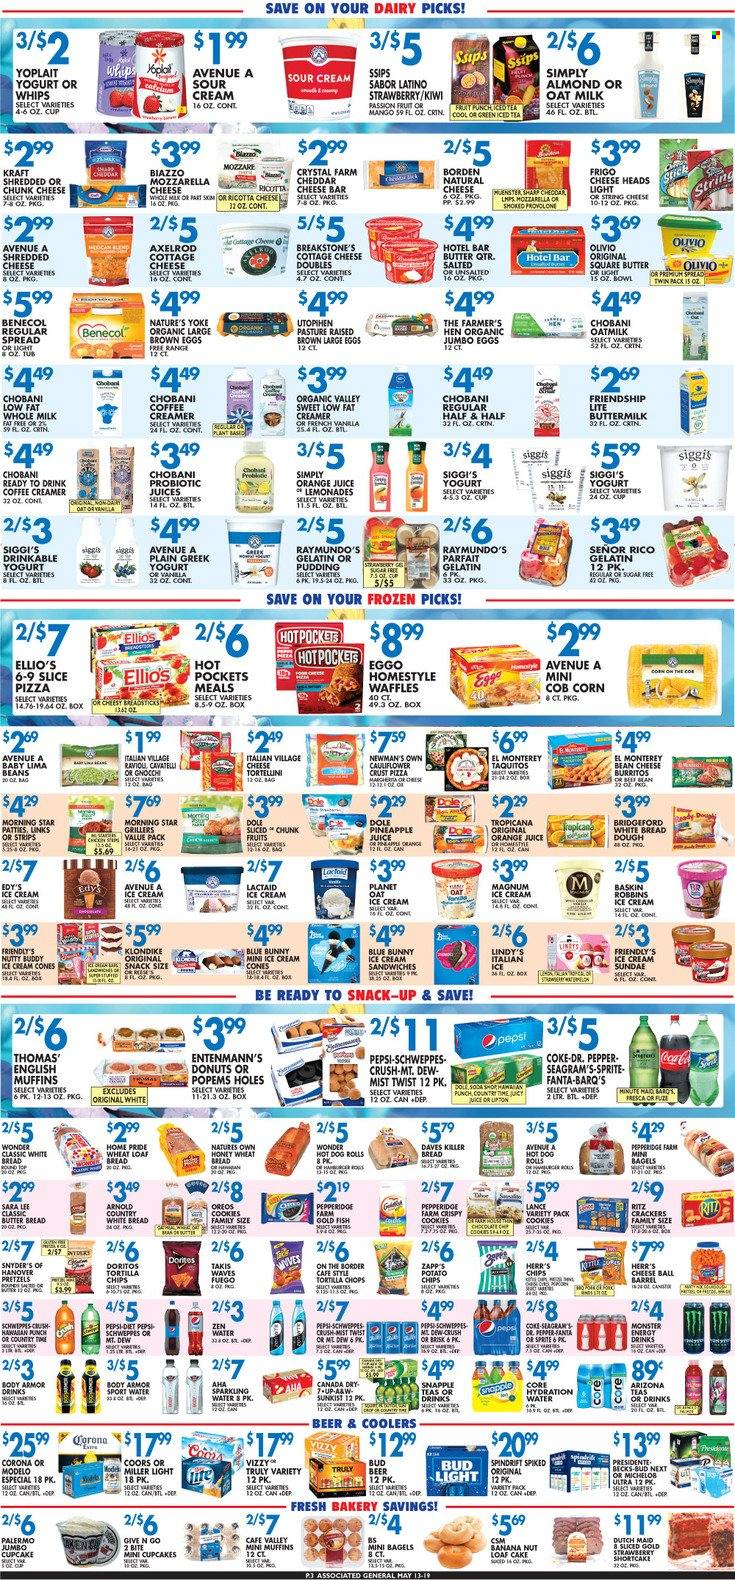 thumbnail - Associated Supermarkets Flyer - 05/13/2022 - 05/19/2022 - Sales products - bagels, bread, english muffins, white bread, hot dog rolls, pretzels, cake, Sara Lee, cupcake, donut, waffles, loaf cake, Entenmann's, corn, Dole, pineapple, fish, gnocchi, pizza, burrito, taquitos, Kraft®, cottage cheese, Lactaid, ricotta, shredded cheese, Münster cheese, chunk cheese, Provolone, greek yoghurt, pudding, yoghurt, Yoplait, Chobani, buttermilk, oat milk, large eggs, sour cream, creamer, bread dough, ice cream, ice cream sandwich, Friendly's Ice Cream, Blue Bunny, lima beans, strips, cookies, snack, crackers, RITZ, Doritos, tortilla chips, Canada Dry, Coca-Cola, Schweppes, Sprite, Pepsi, orange juice, juice, Fanta, Body Armor, energy drink, Monster, Lipton, ice tea, Dr. Pepper, Diet Pepsi, 7UP, Monster Energy, AriZona, Snapple, Country Time, Spindrift, punch, TRULY, beer, Corona Extra, Miller, Beck's, Modelo, bowl, gelatin, Half and half, Coors, Michelob. Page 3.